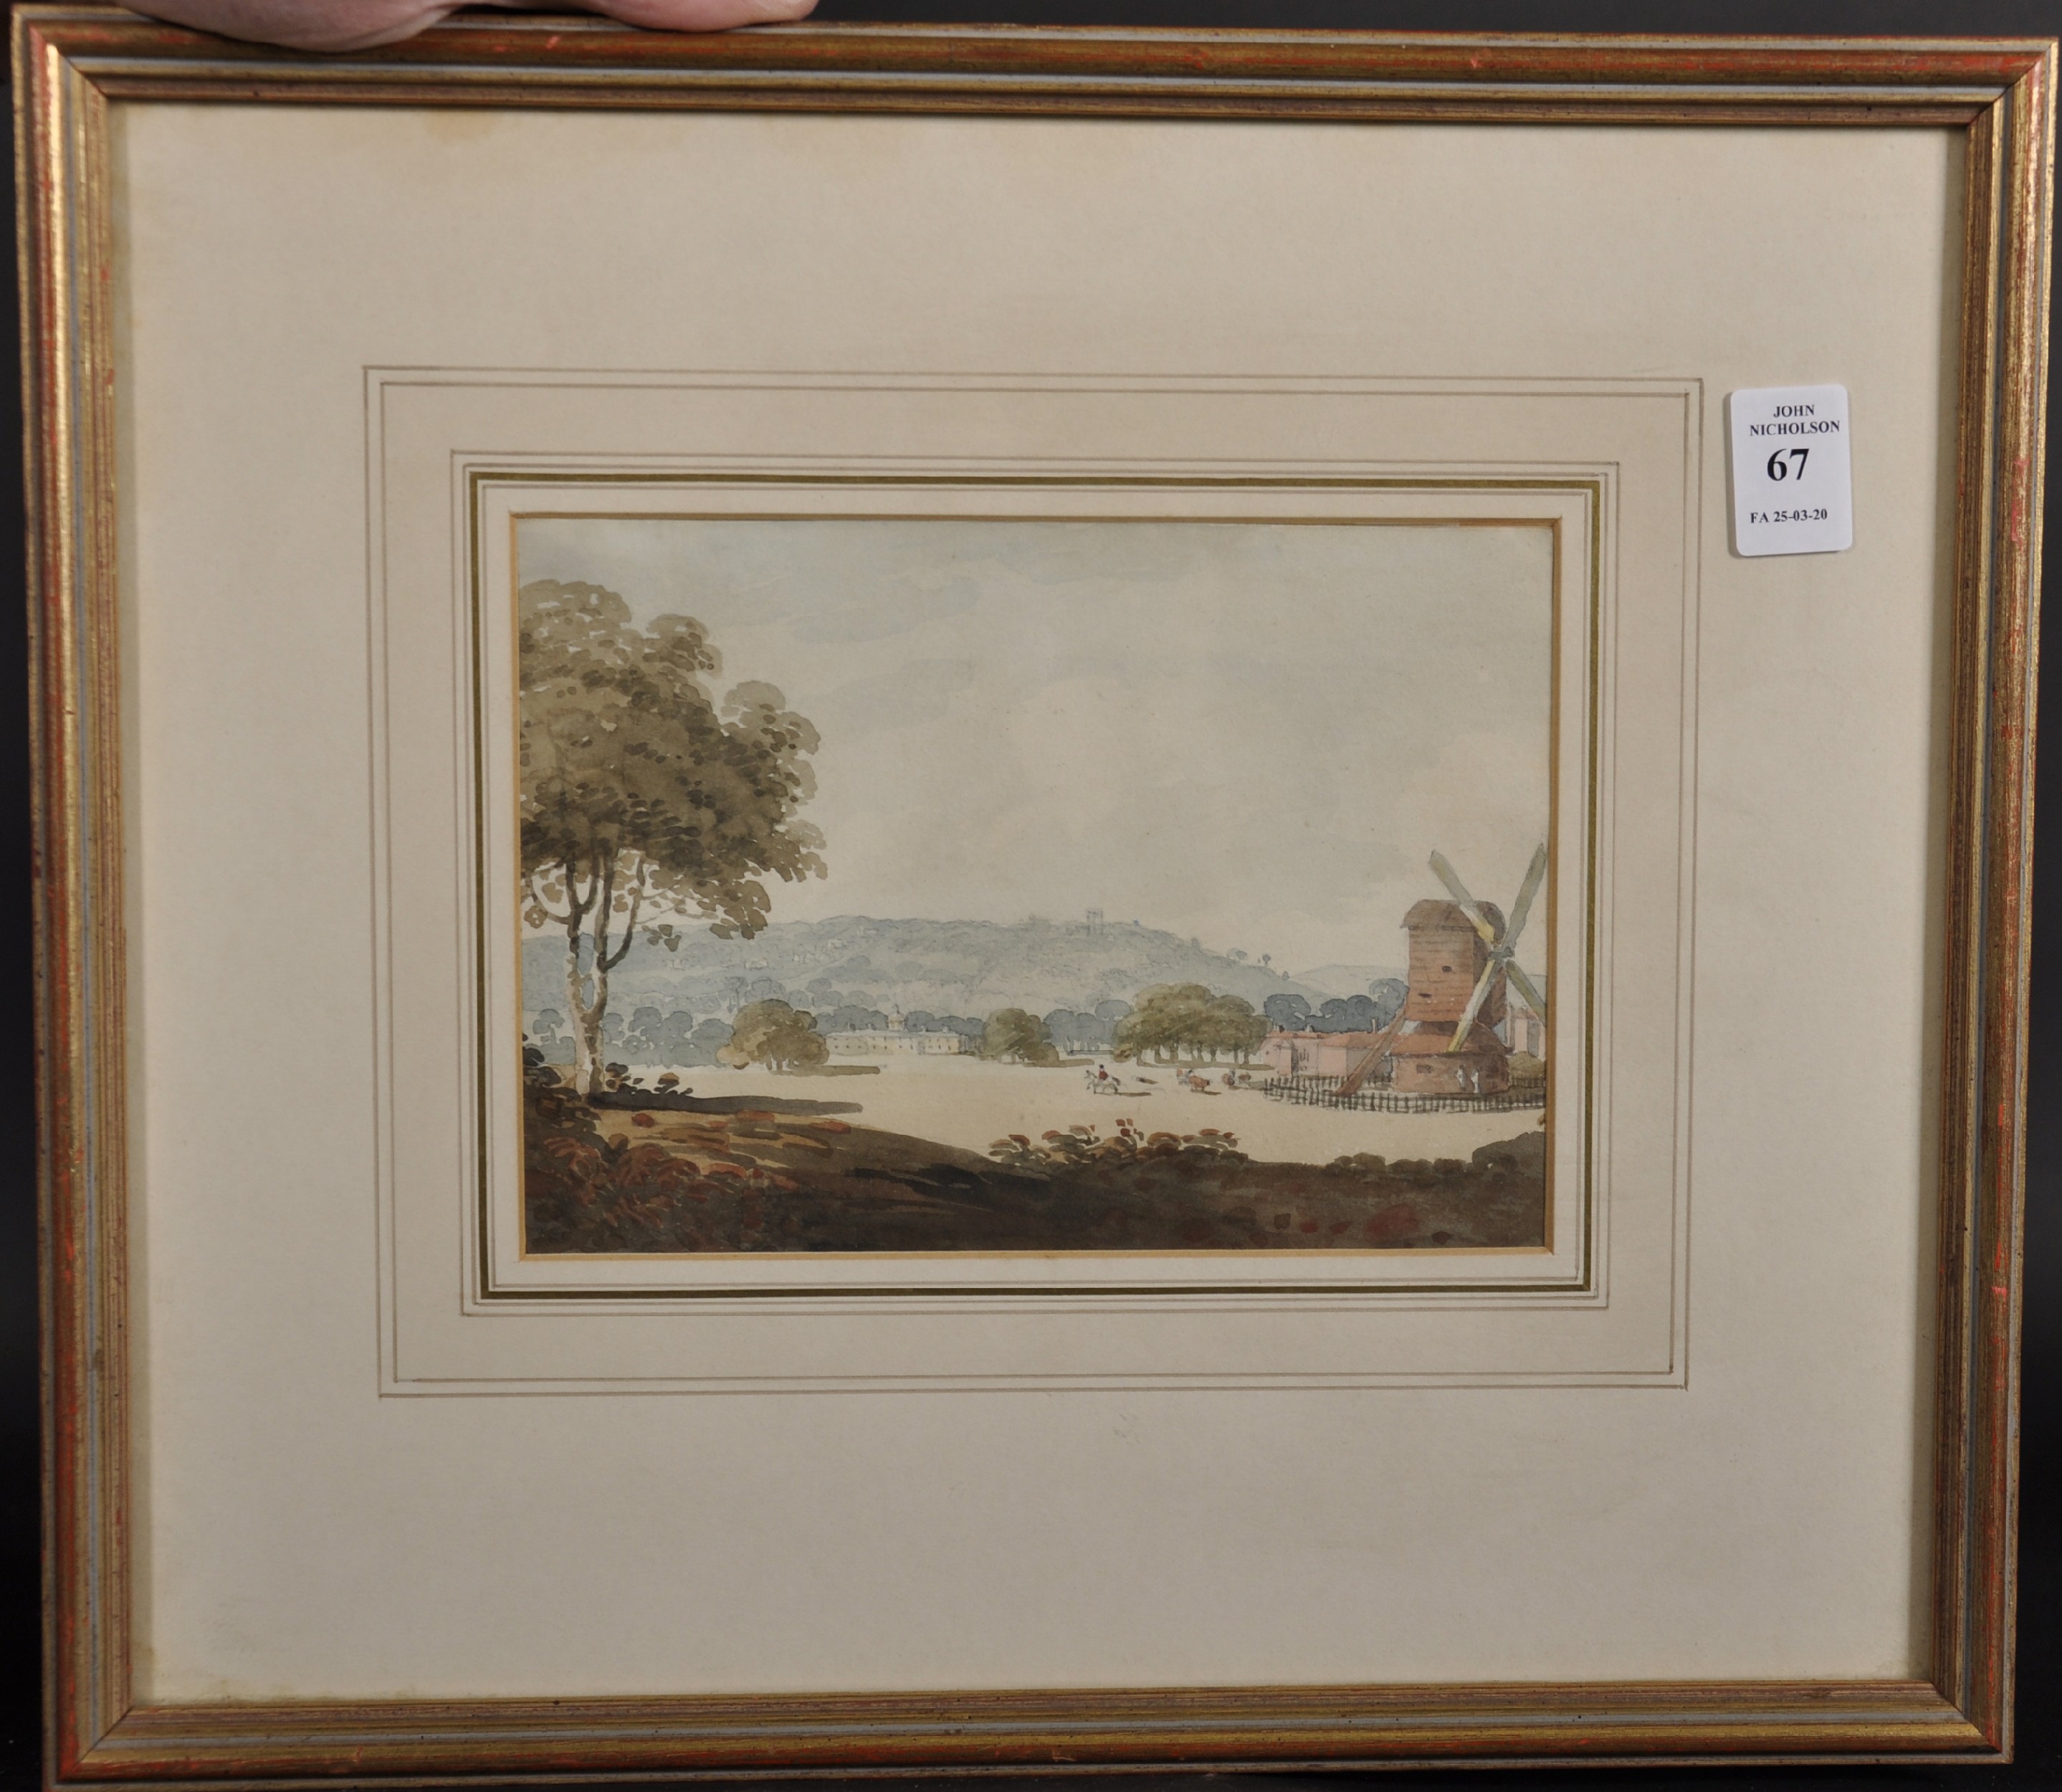 George Heriot (c.1759-1839) British. "On Blackheath, Kent", Watercolour, Inscribed on a label on the - Image 2 of 4